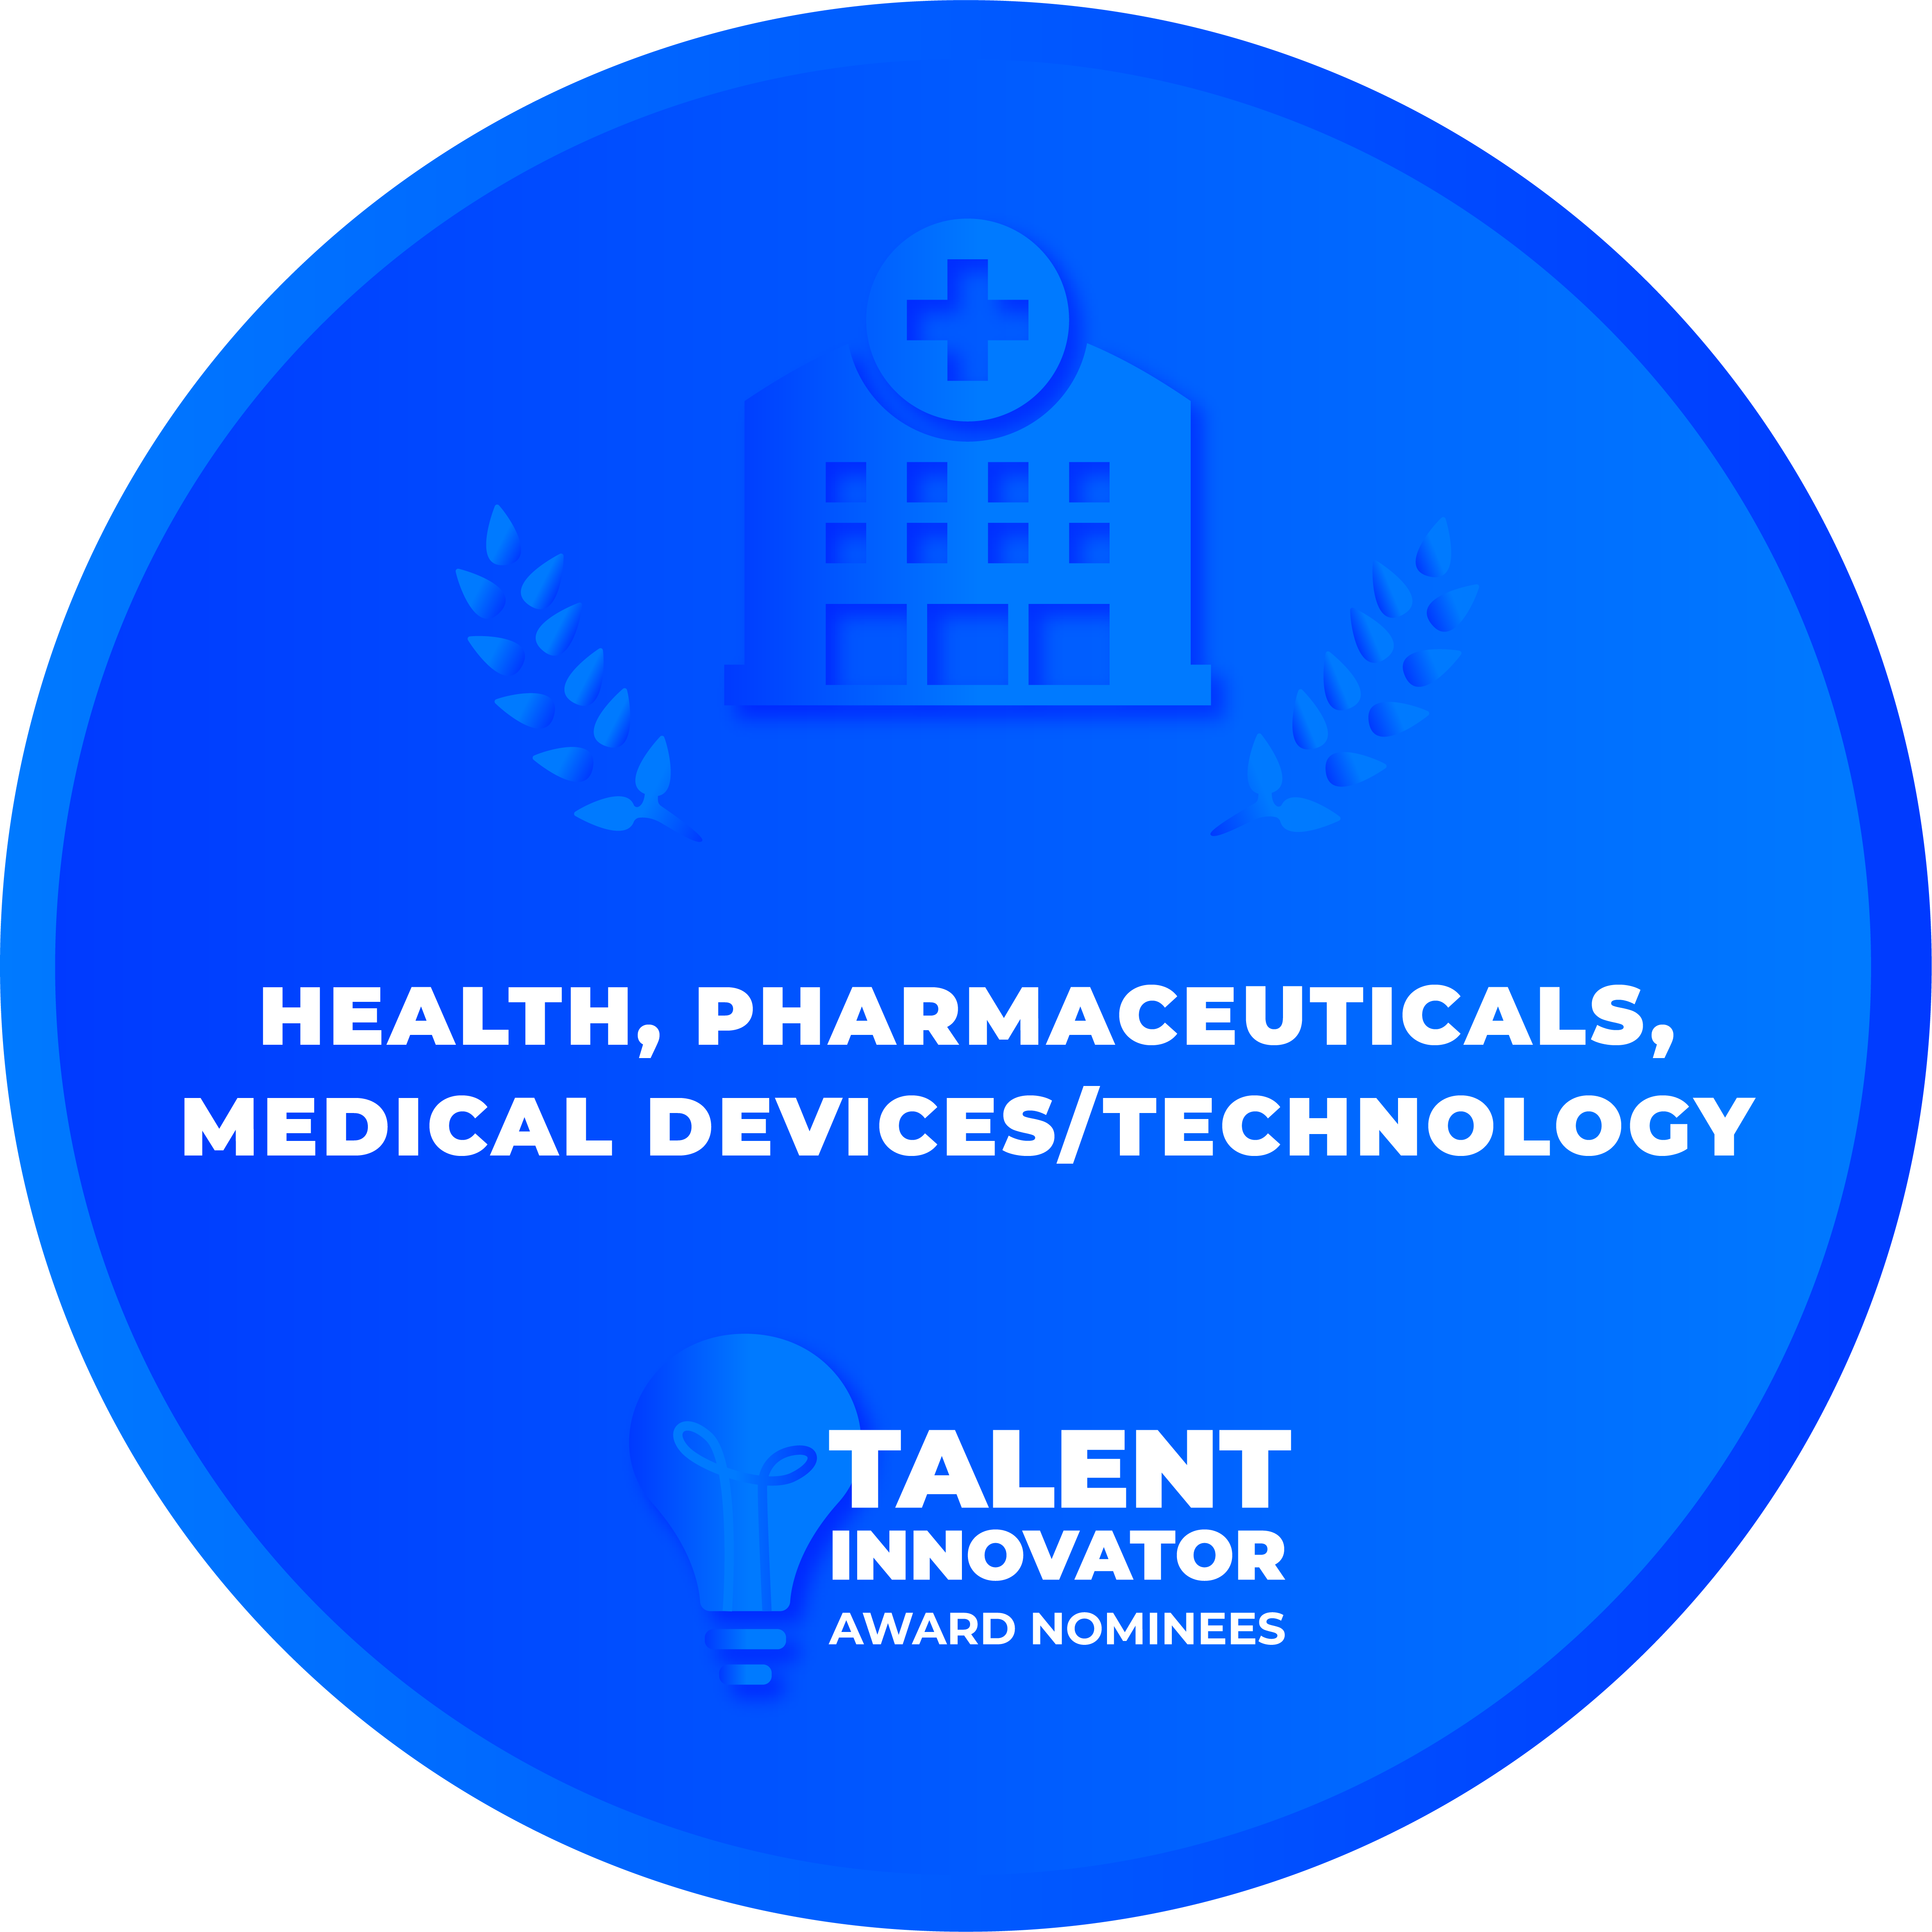 CRCA 2022 - TALENT INNOVATOR AWARD - Health Pharmaceuticals Medical Devices Technology